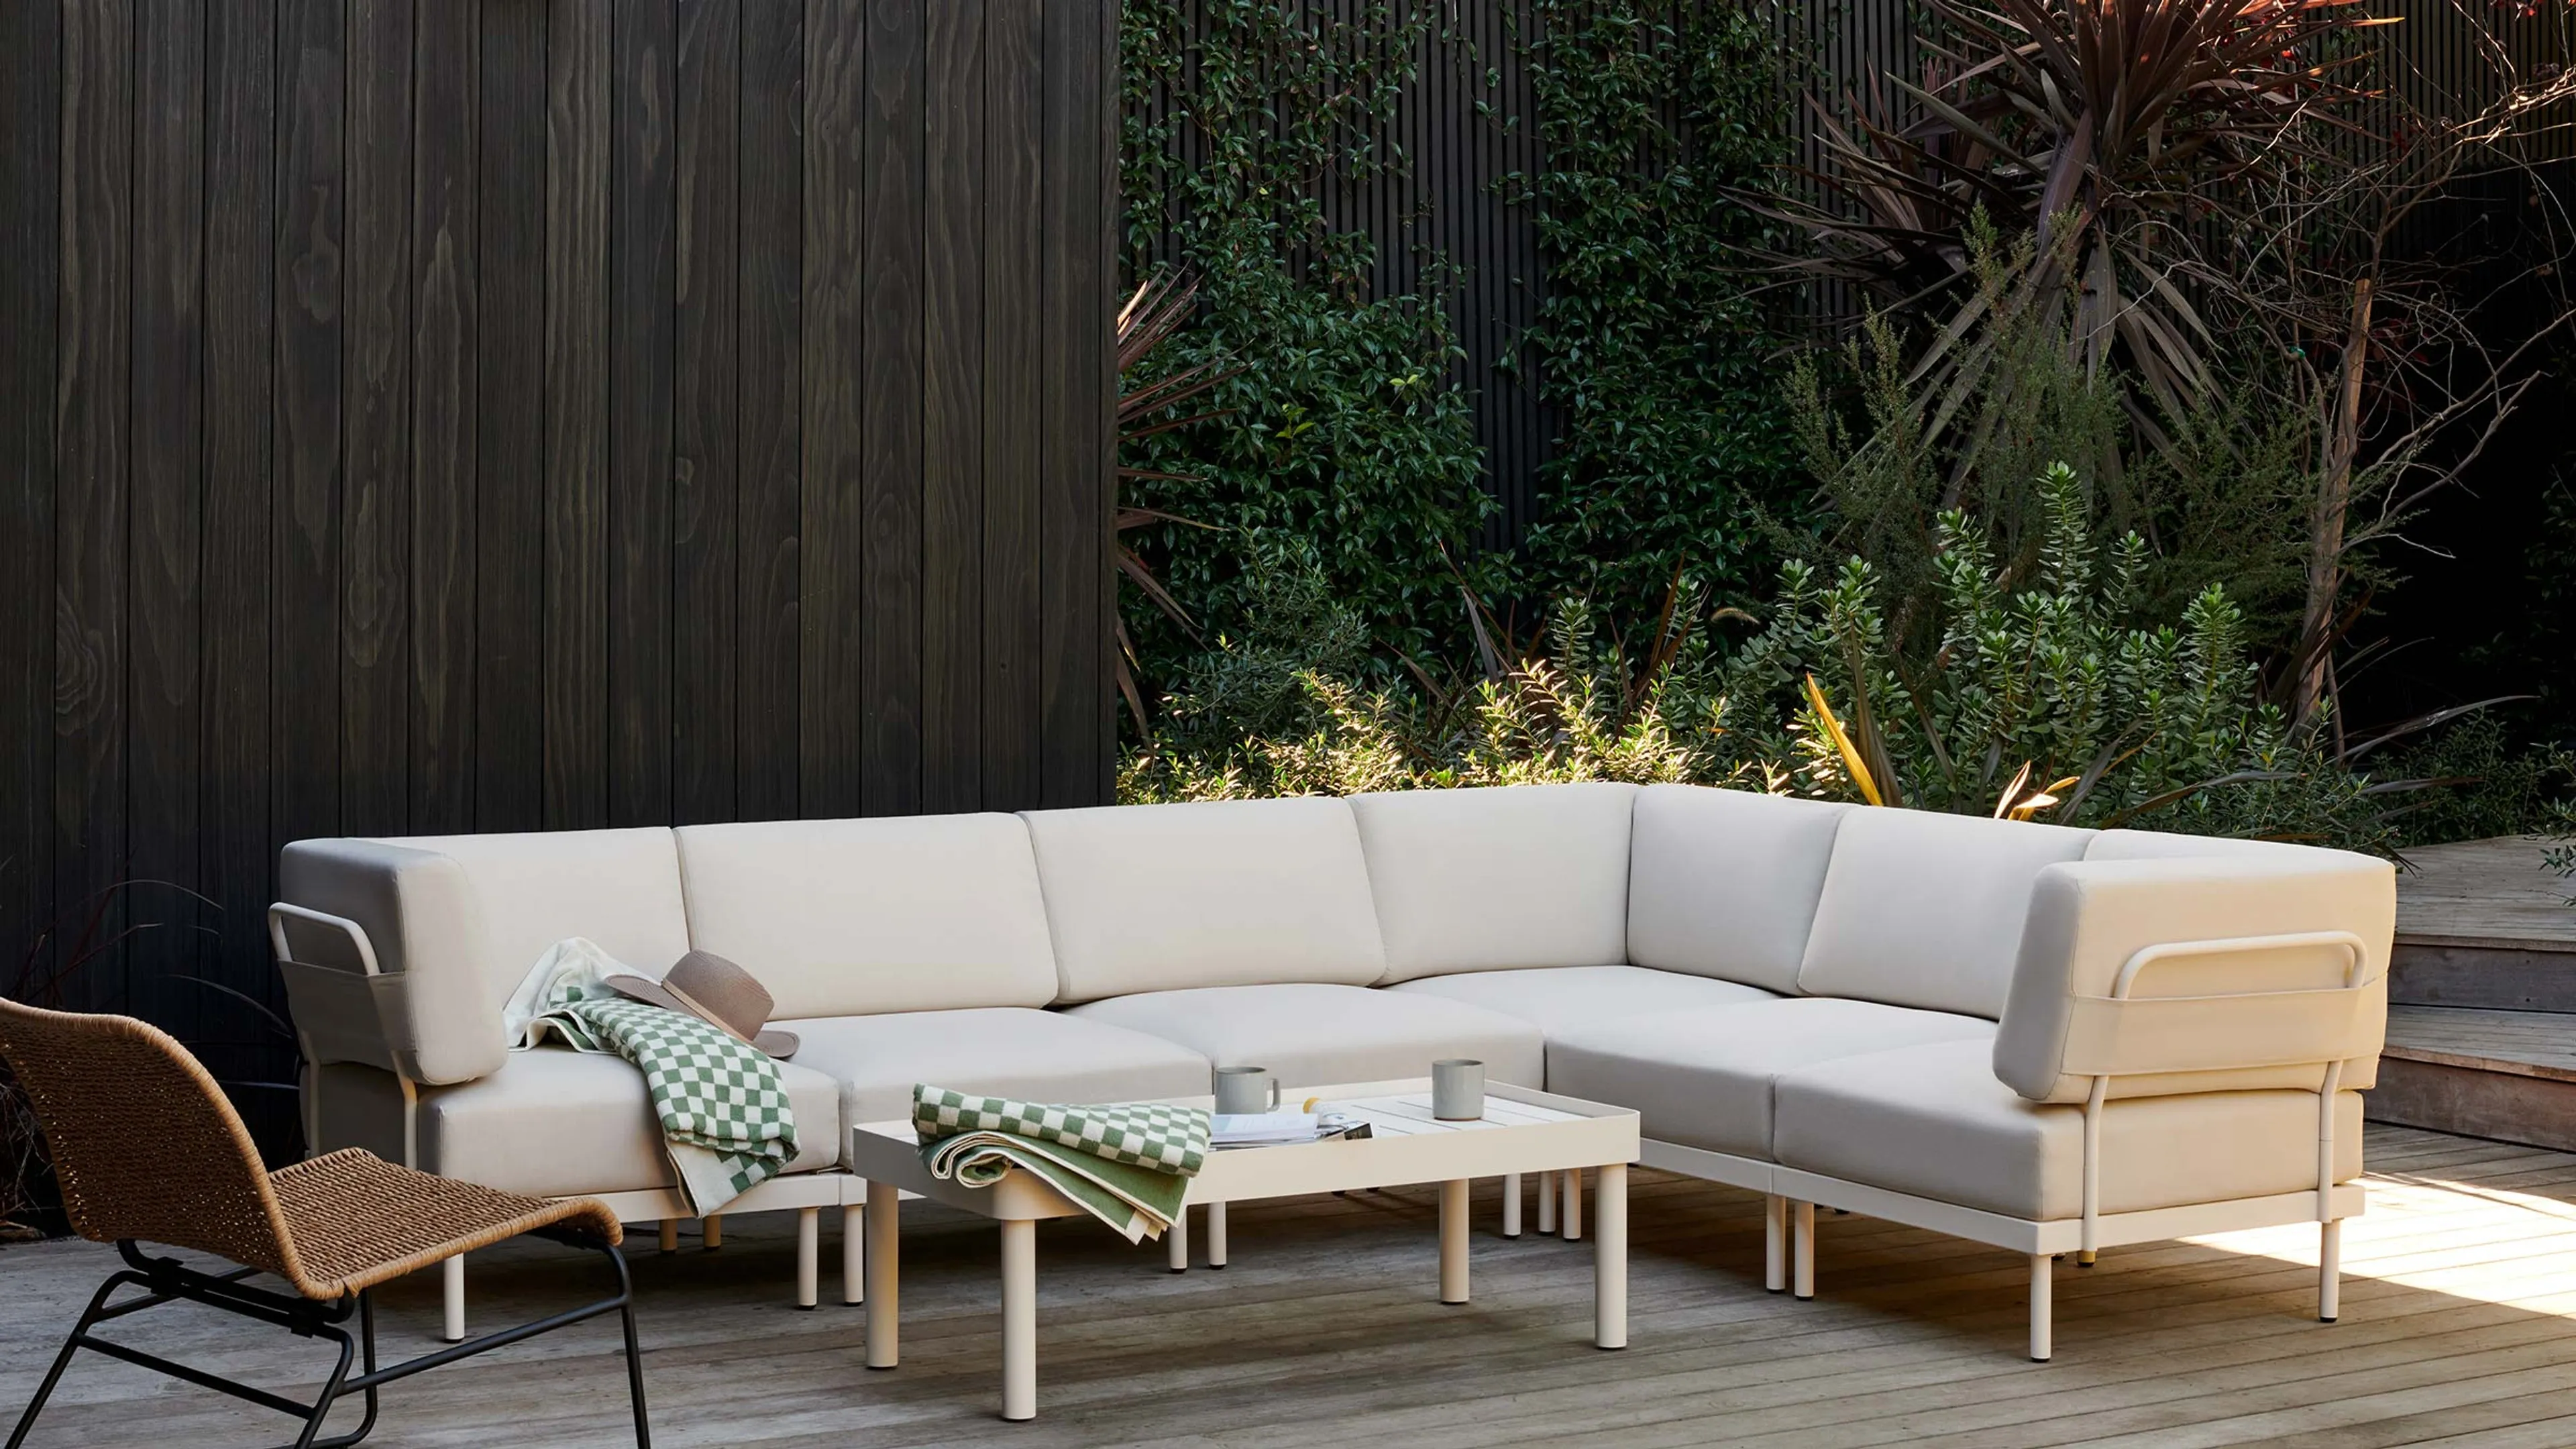 Relay Outdoor 6-Piece Armless Sectional